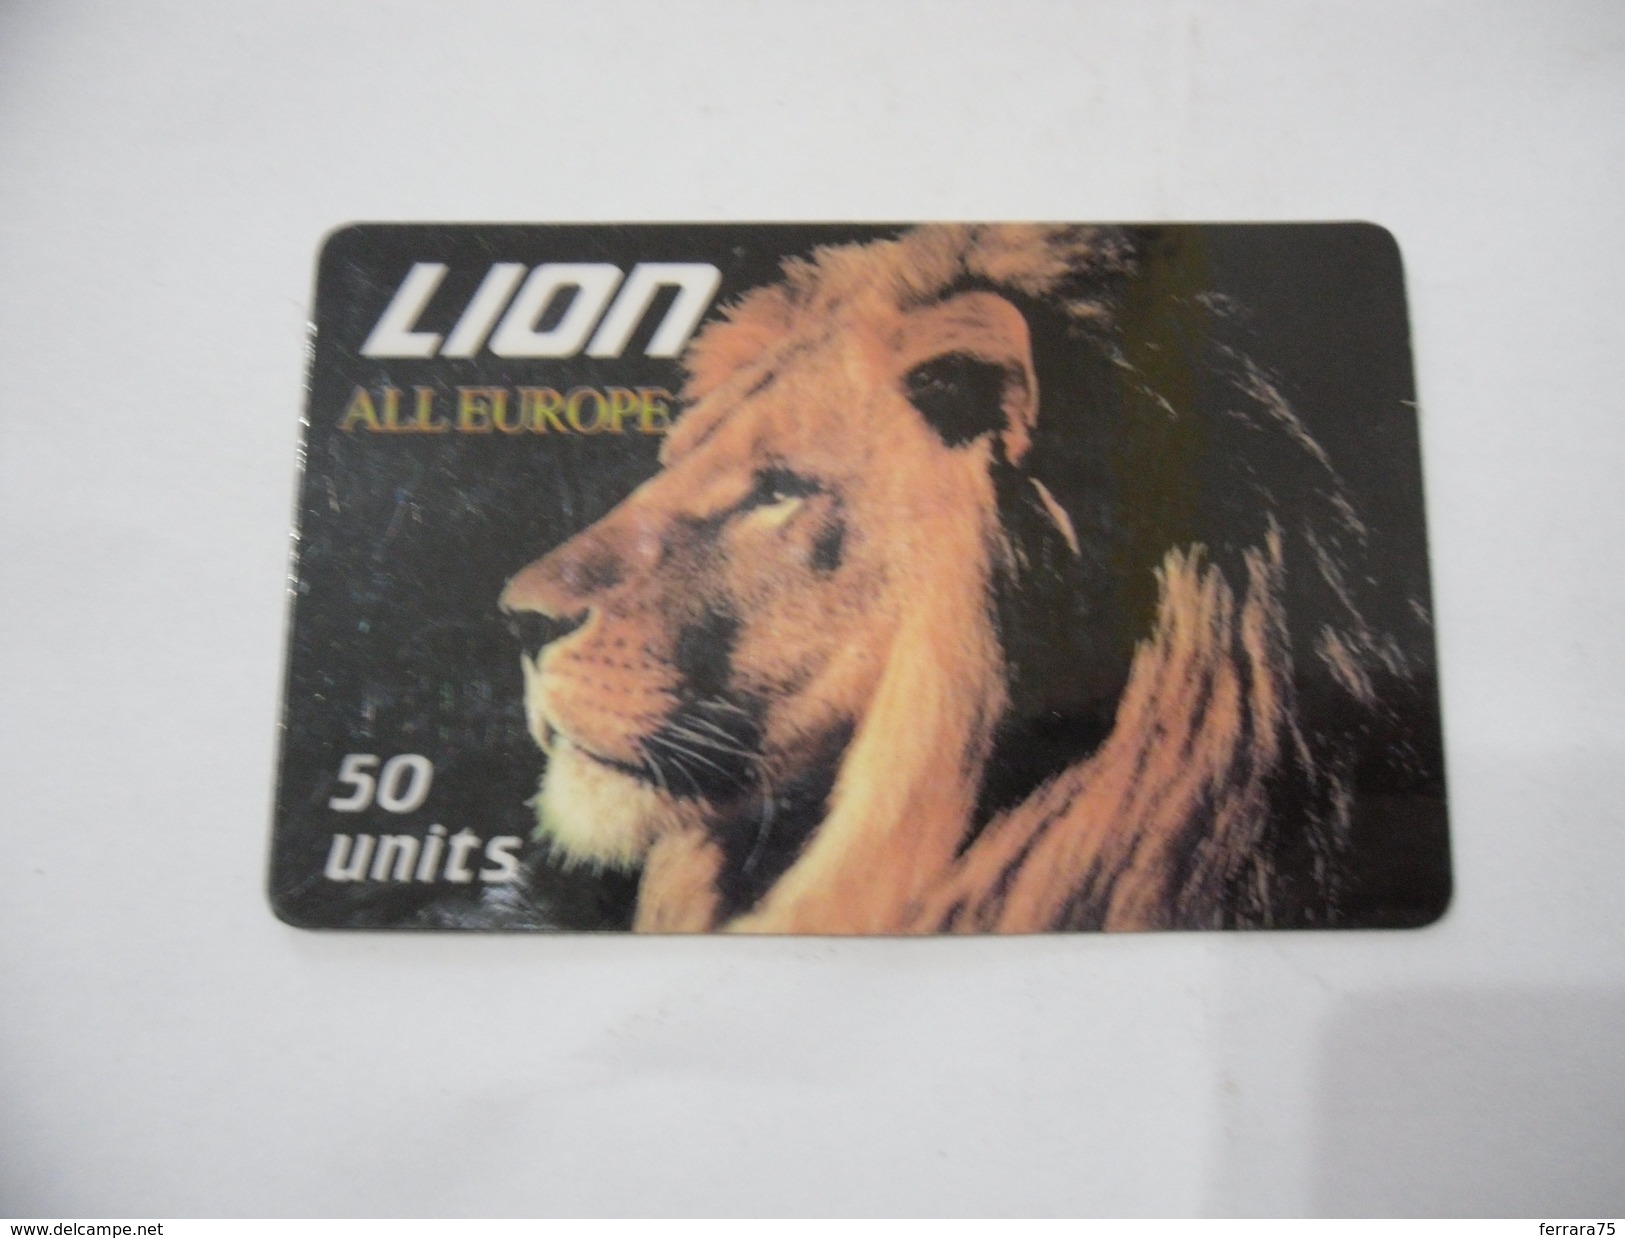 CARTA TELEFONICA PHONE CARD  LION ALL EUROPE. - Other - Europe